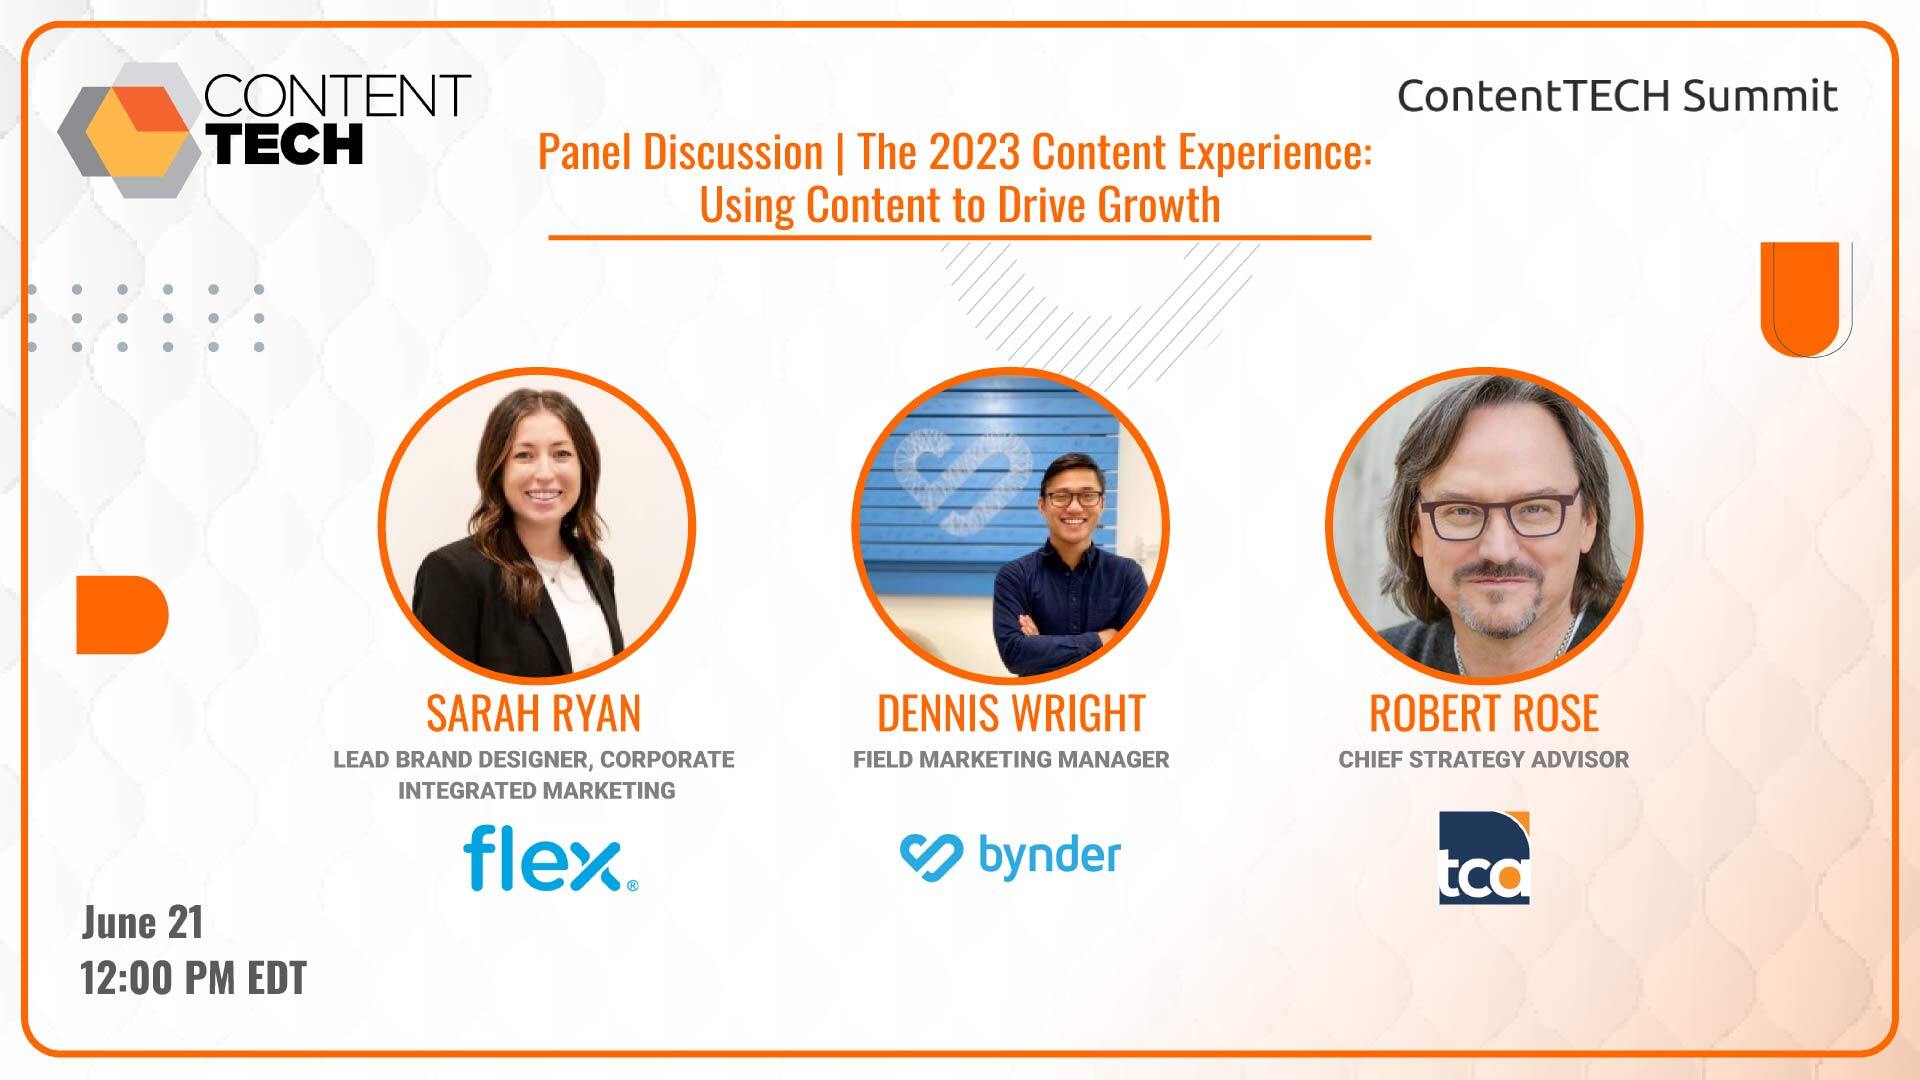 ContentTECH Summit - The 2023 Content Experience: Using Content to Drive Growth